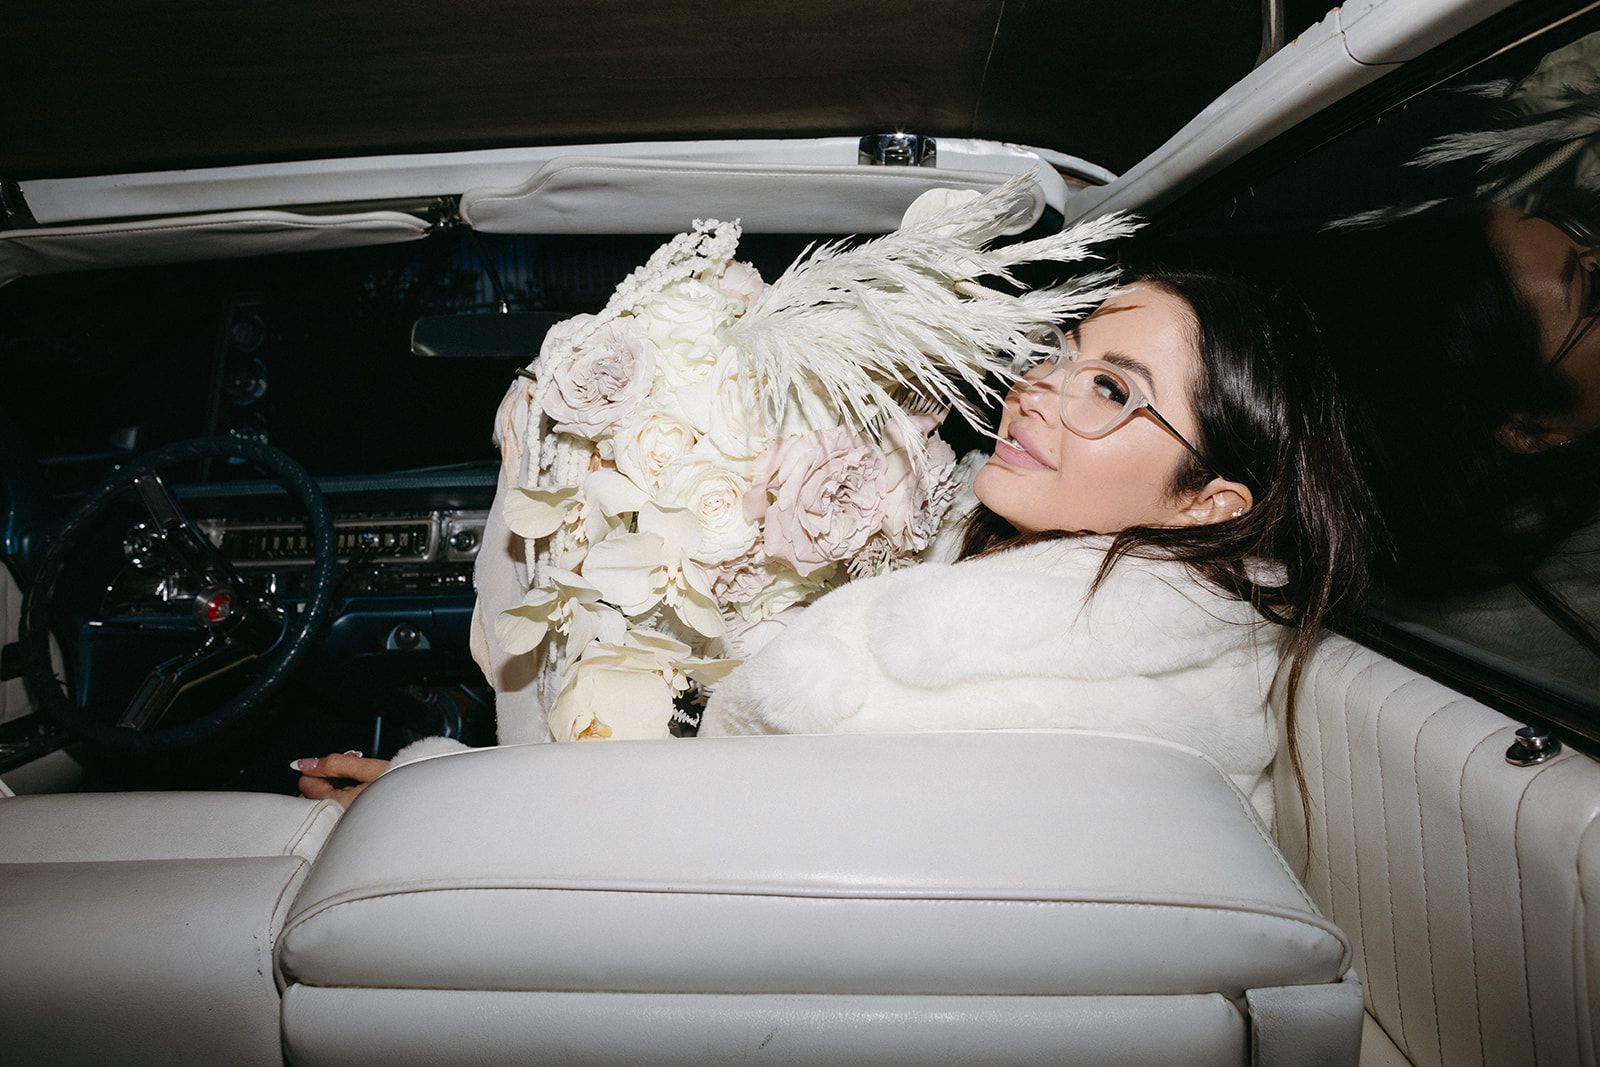 Bride in Classic Car and White Fur Coat holding White Monochromatic Bouquet 